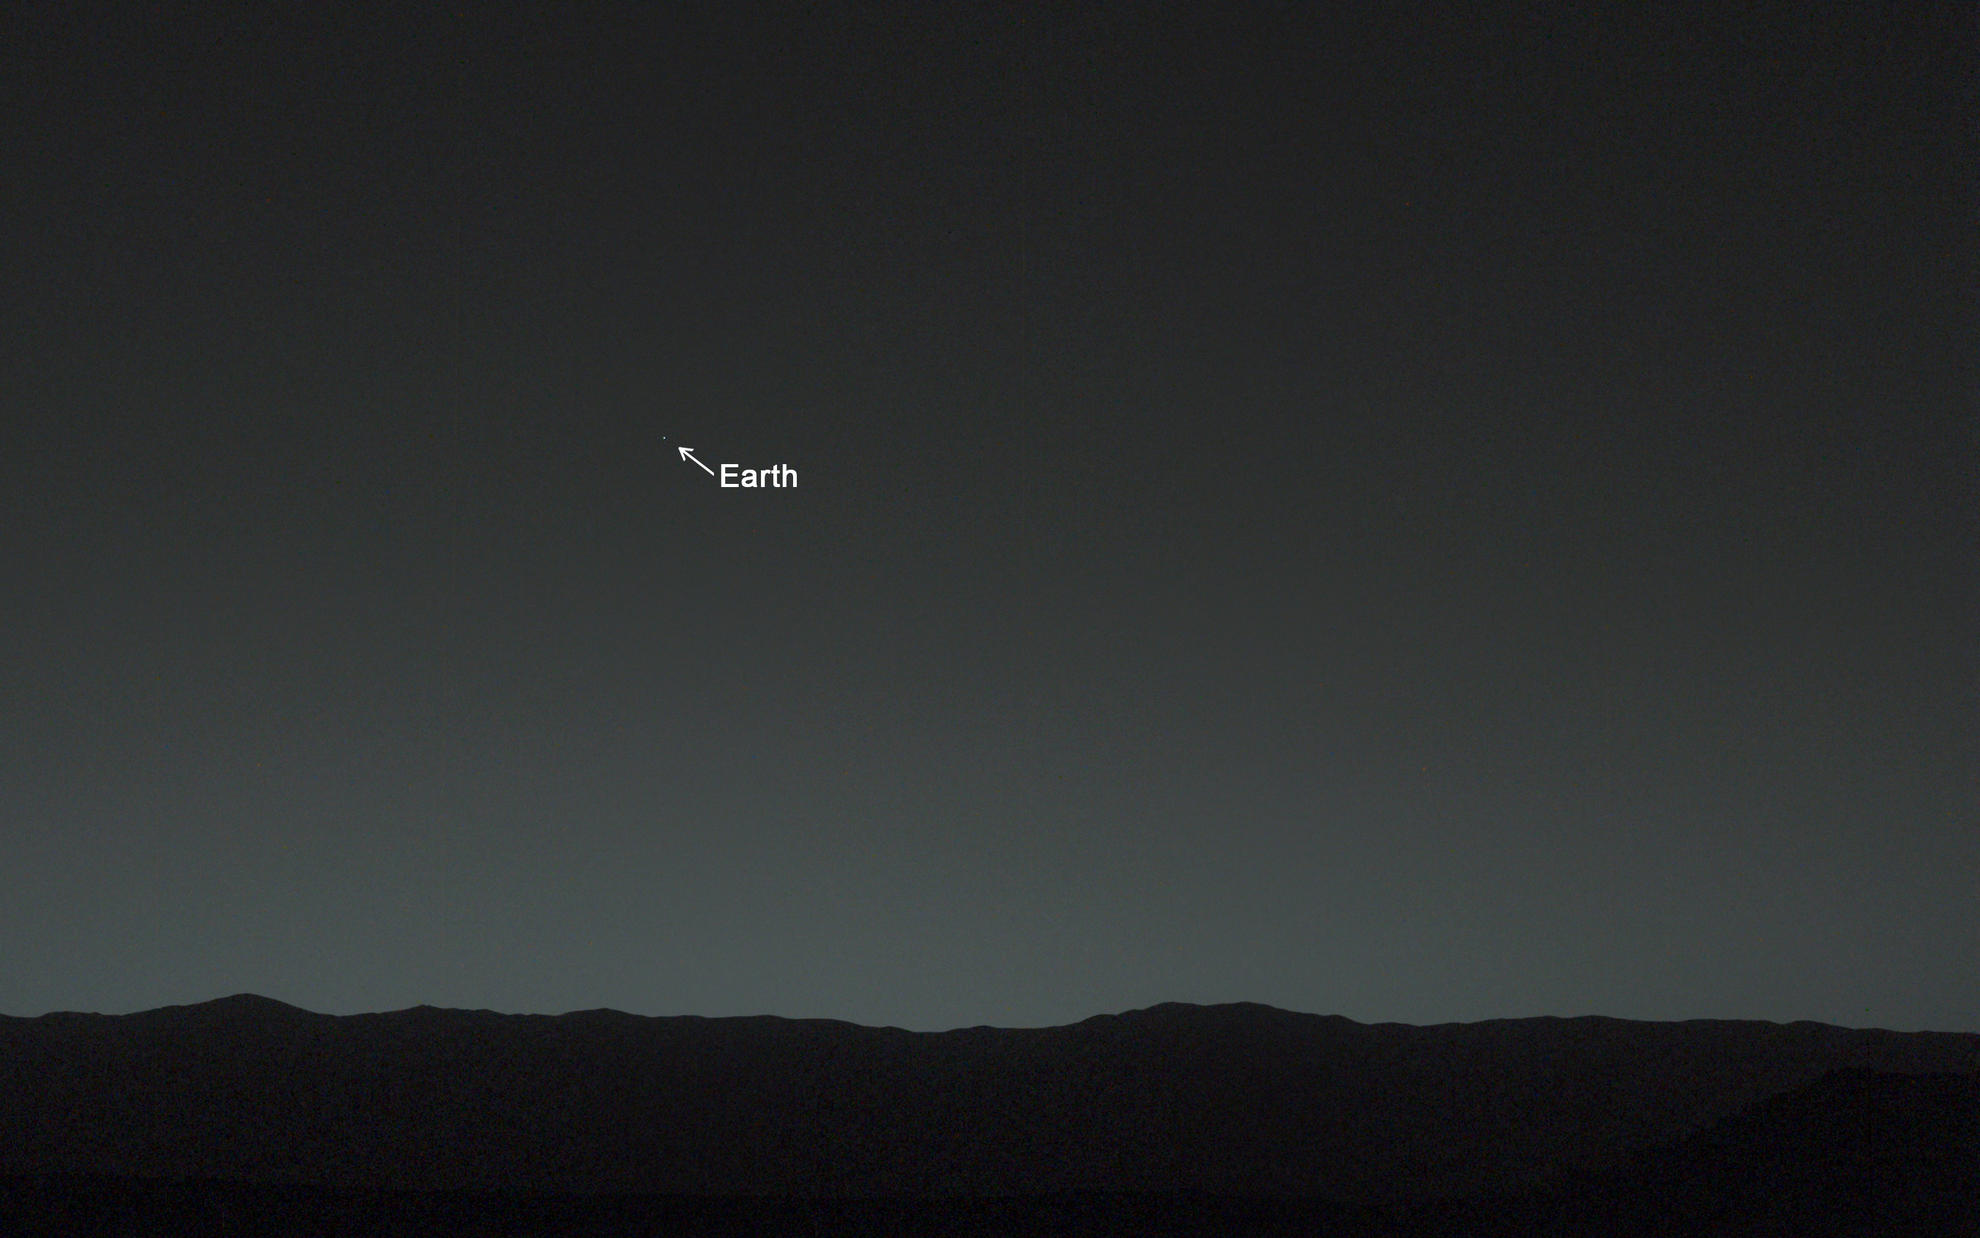 This view of the twilight sky and Martian horizon taken by NASA's Curiosity Mars rover includes Earth as the brightest point of light in the night sky.